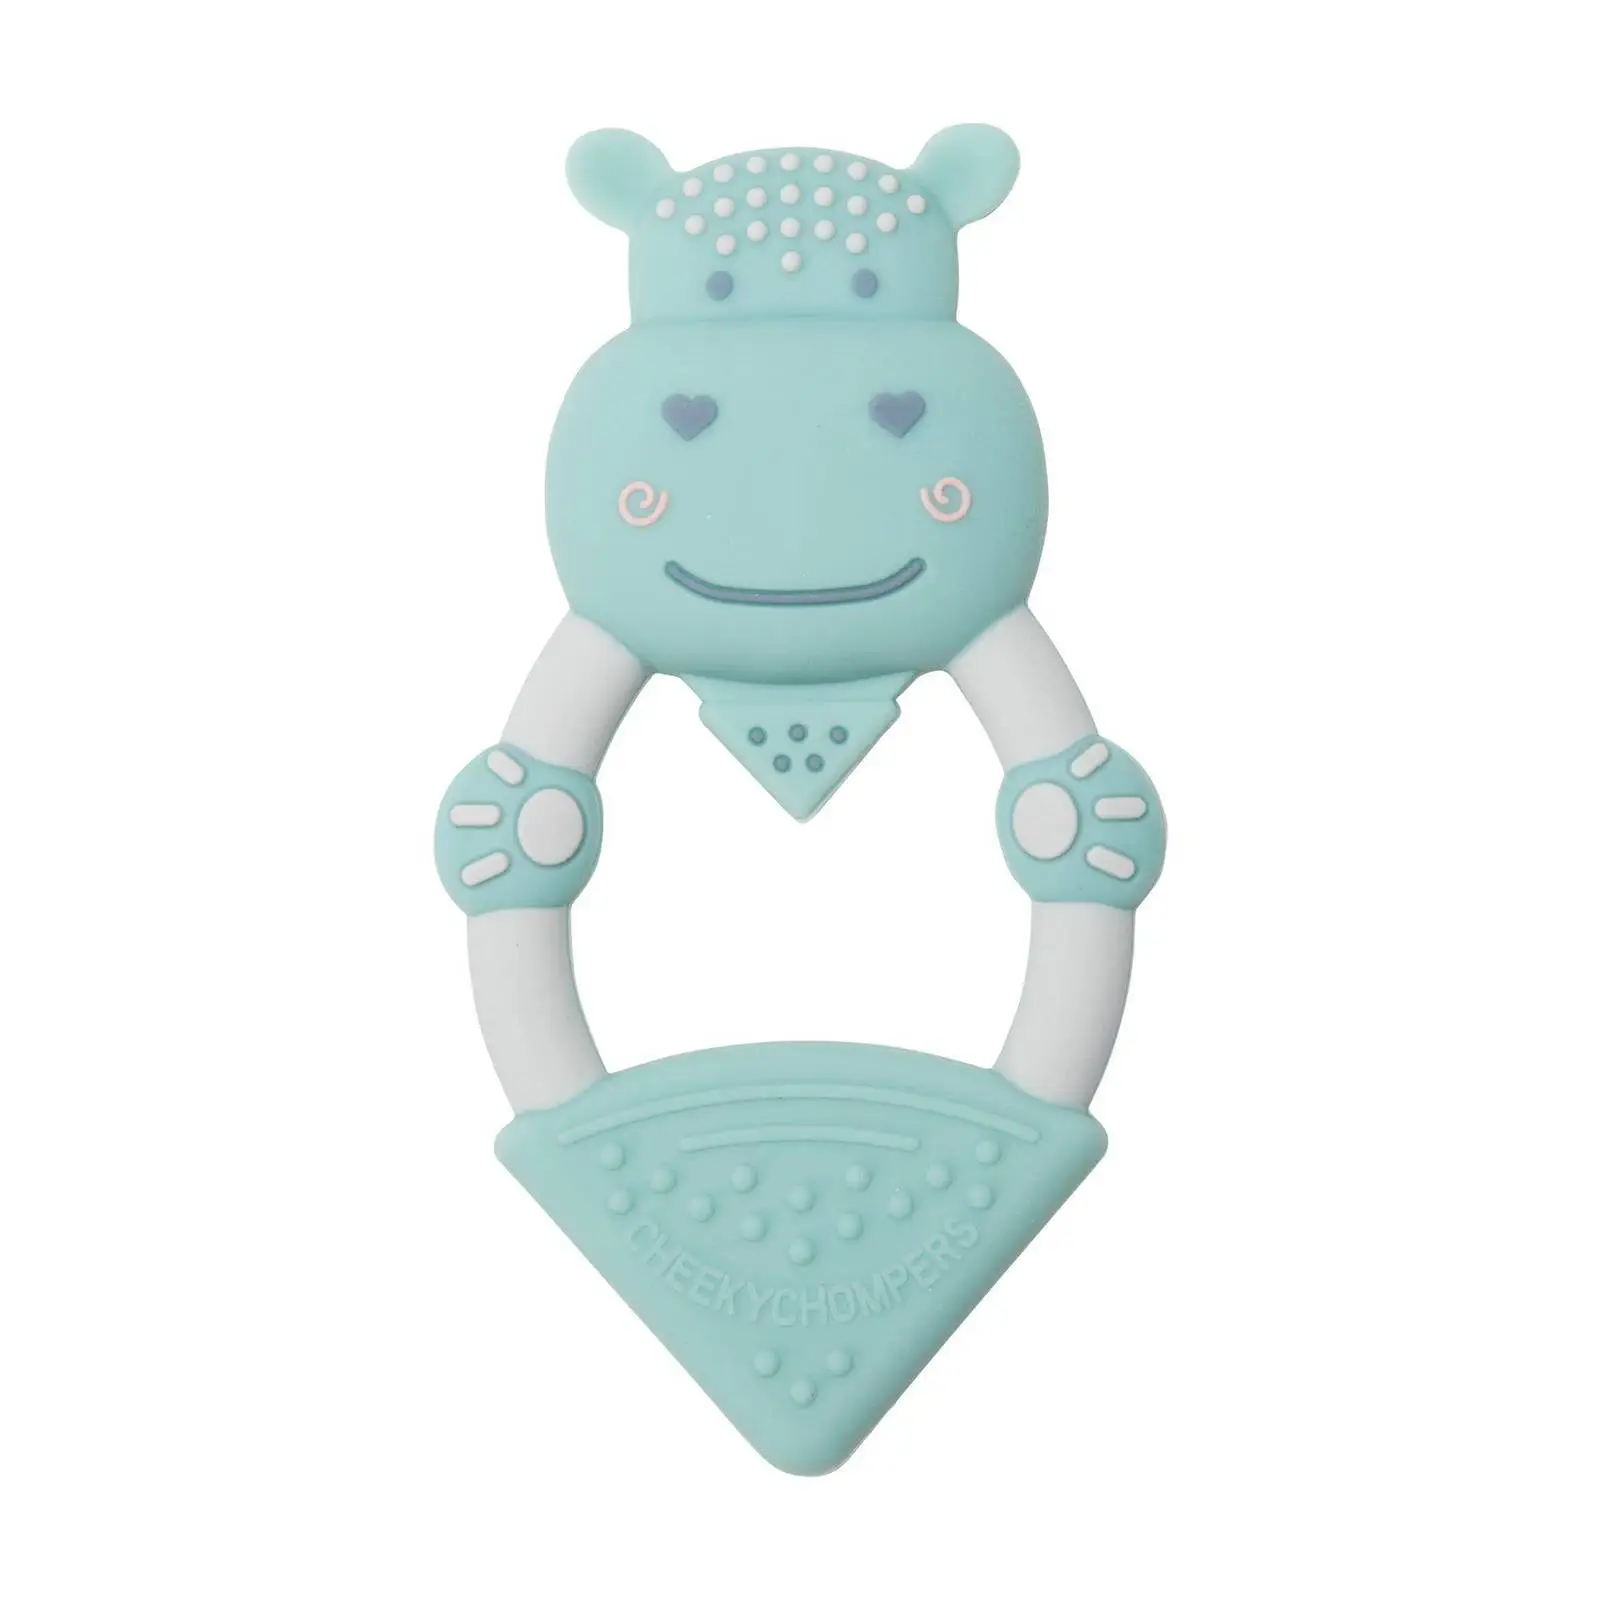 Textured Baby Animal Teether – Chewy the Hippo